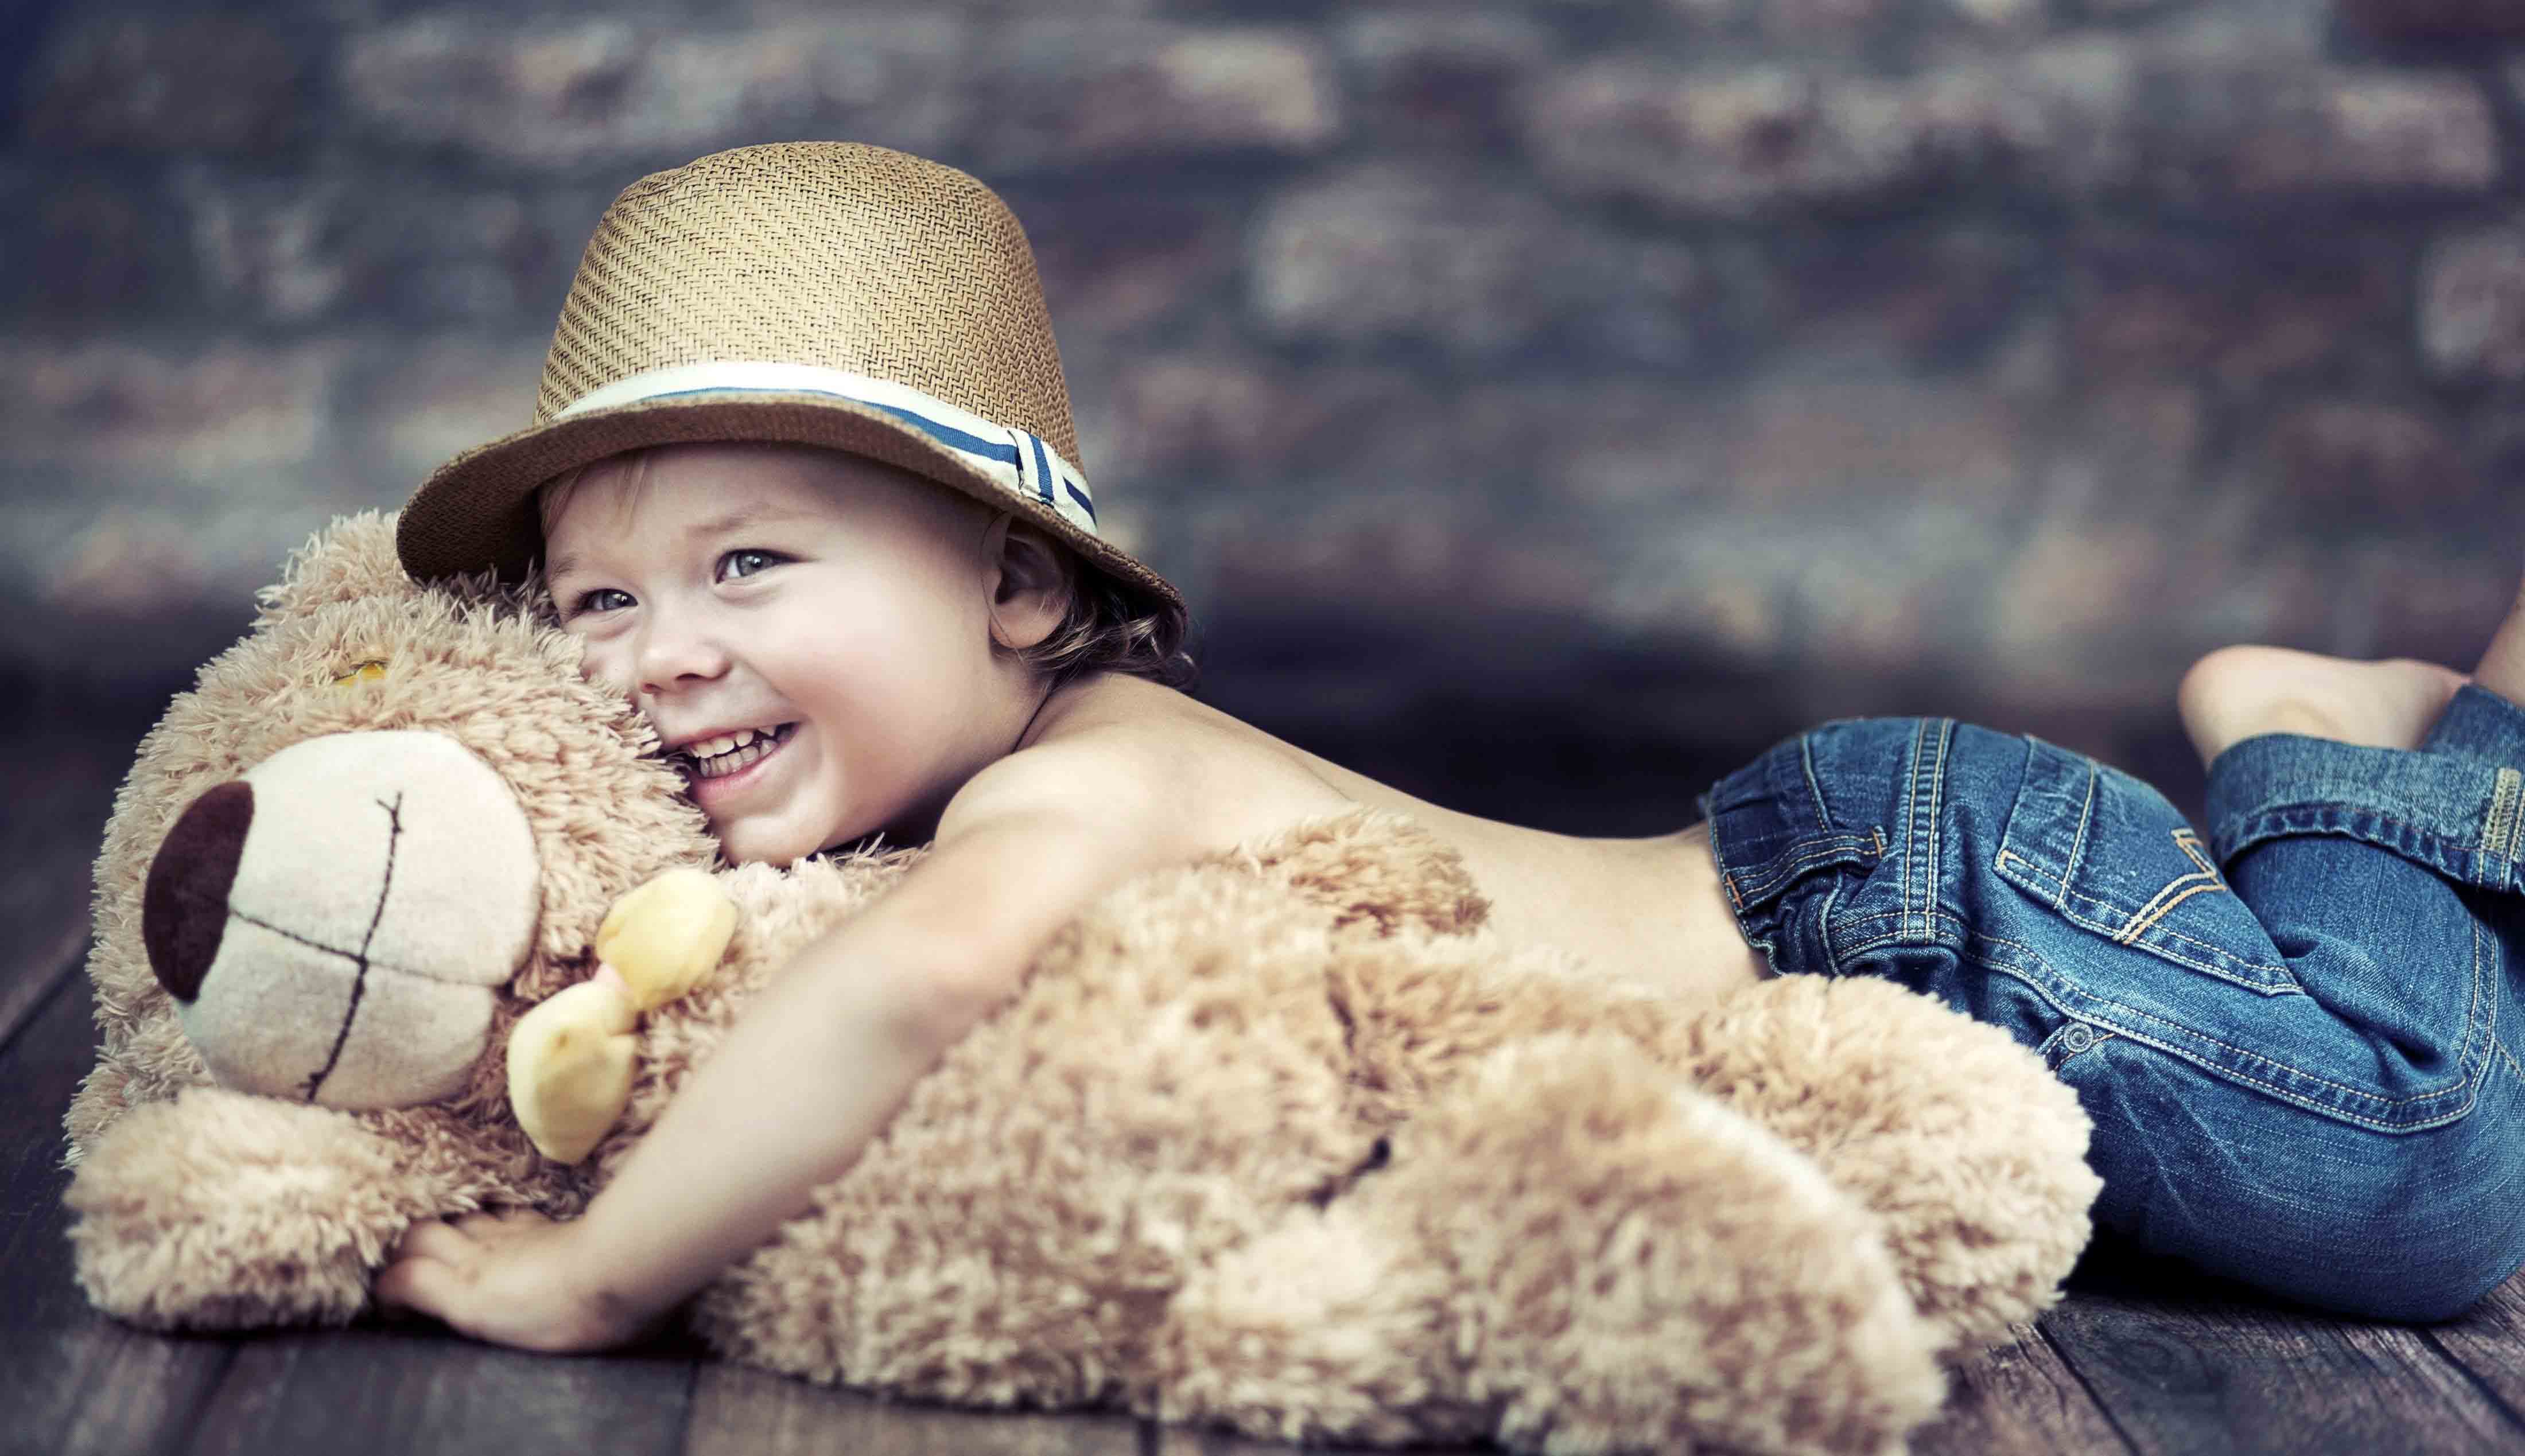 teddy bear with cute baby boy high resolution image wallpaper free download